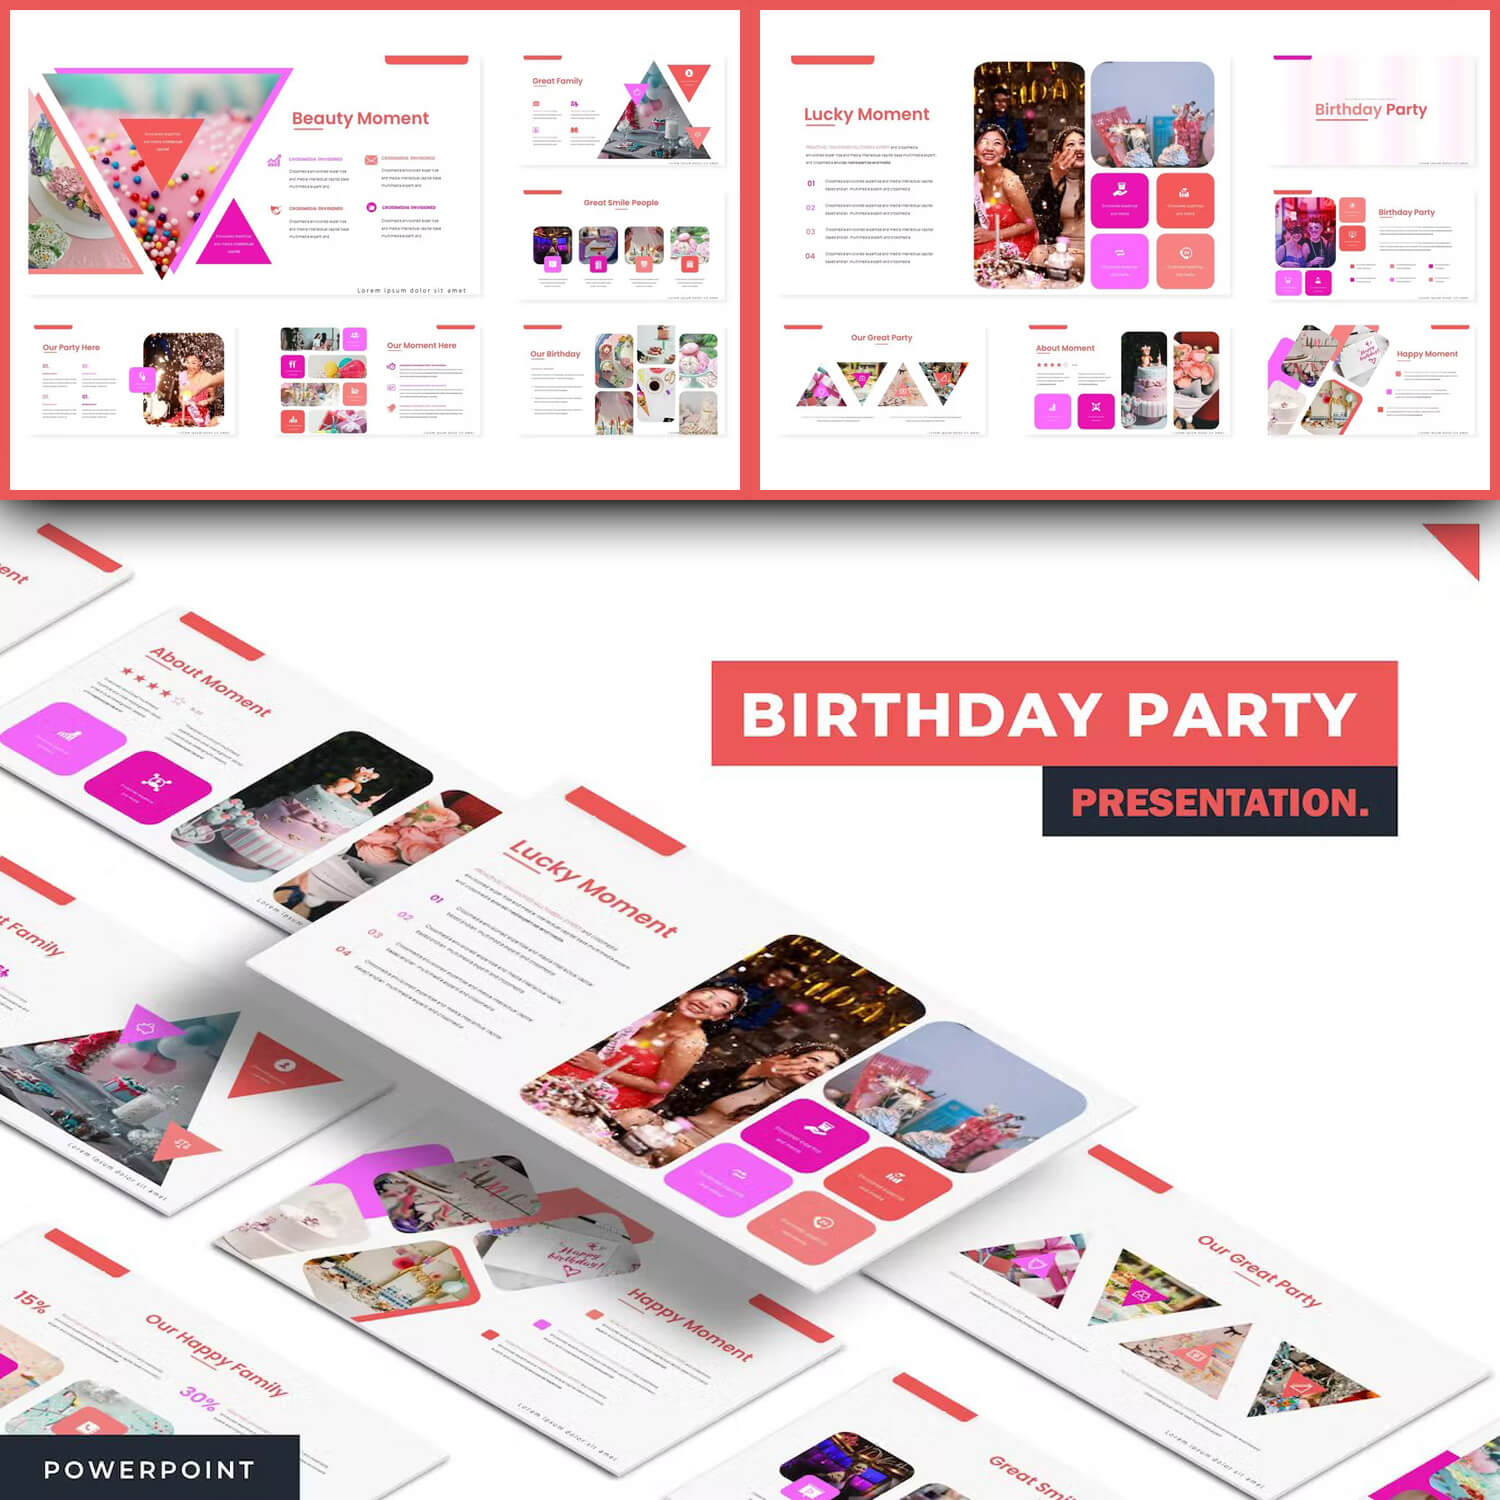 Birthday Party - Powerpoint Template.